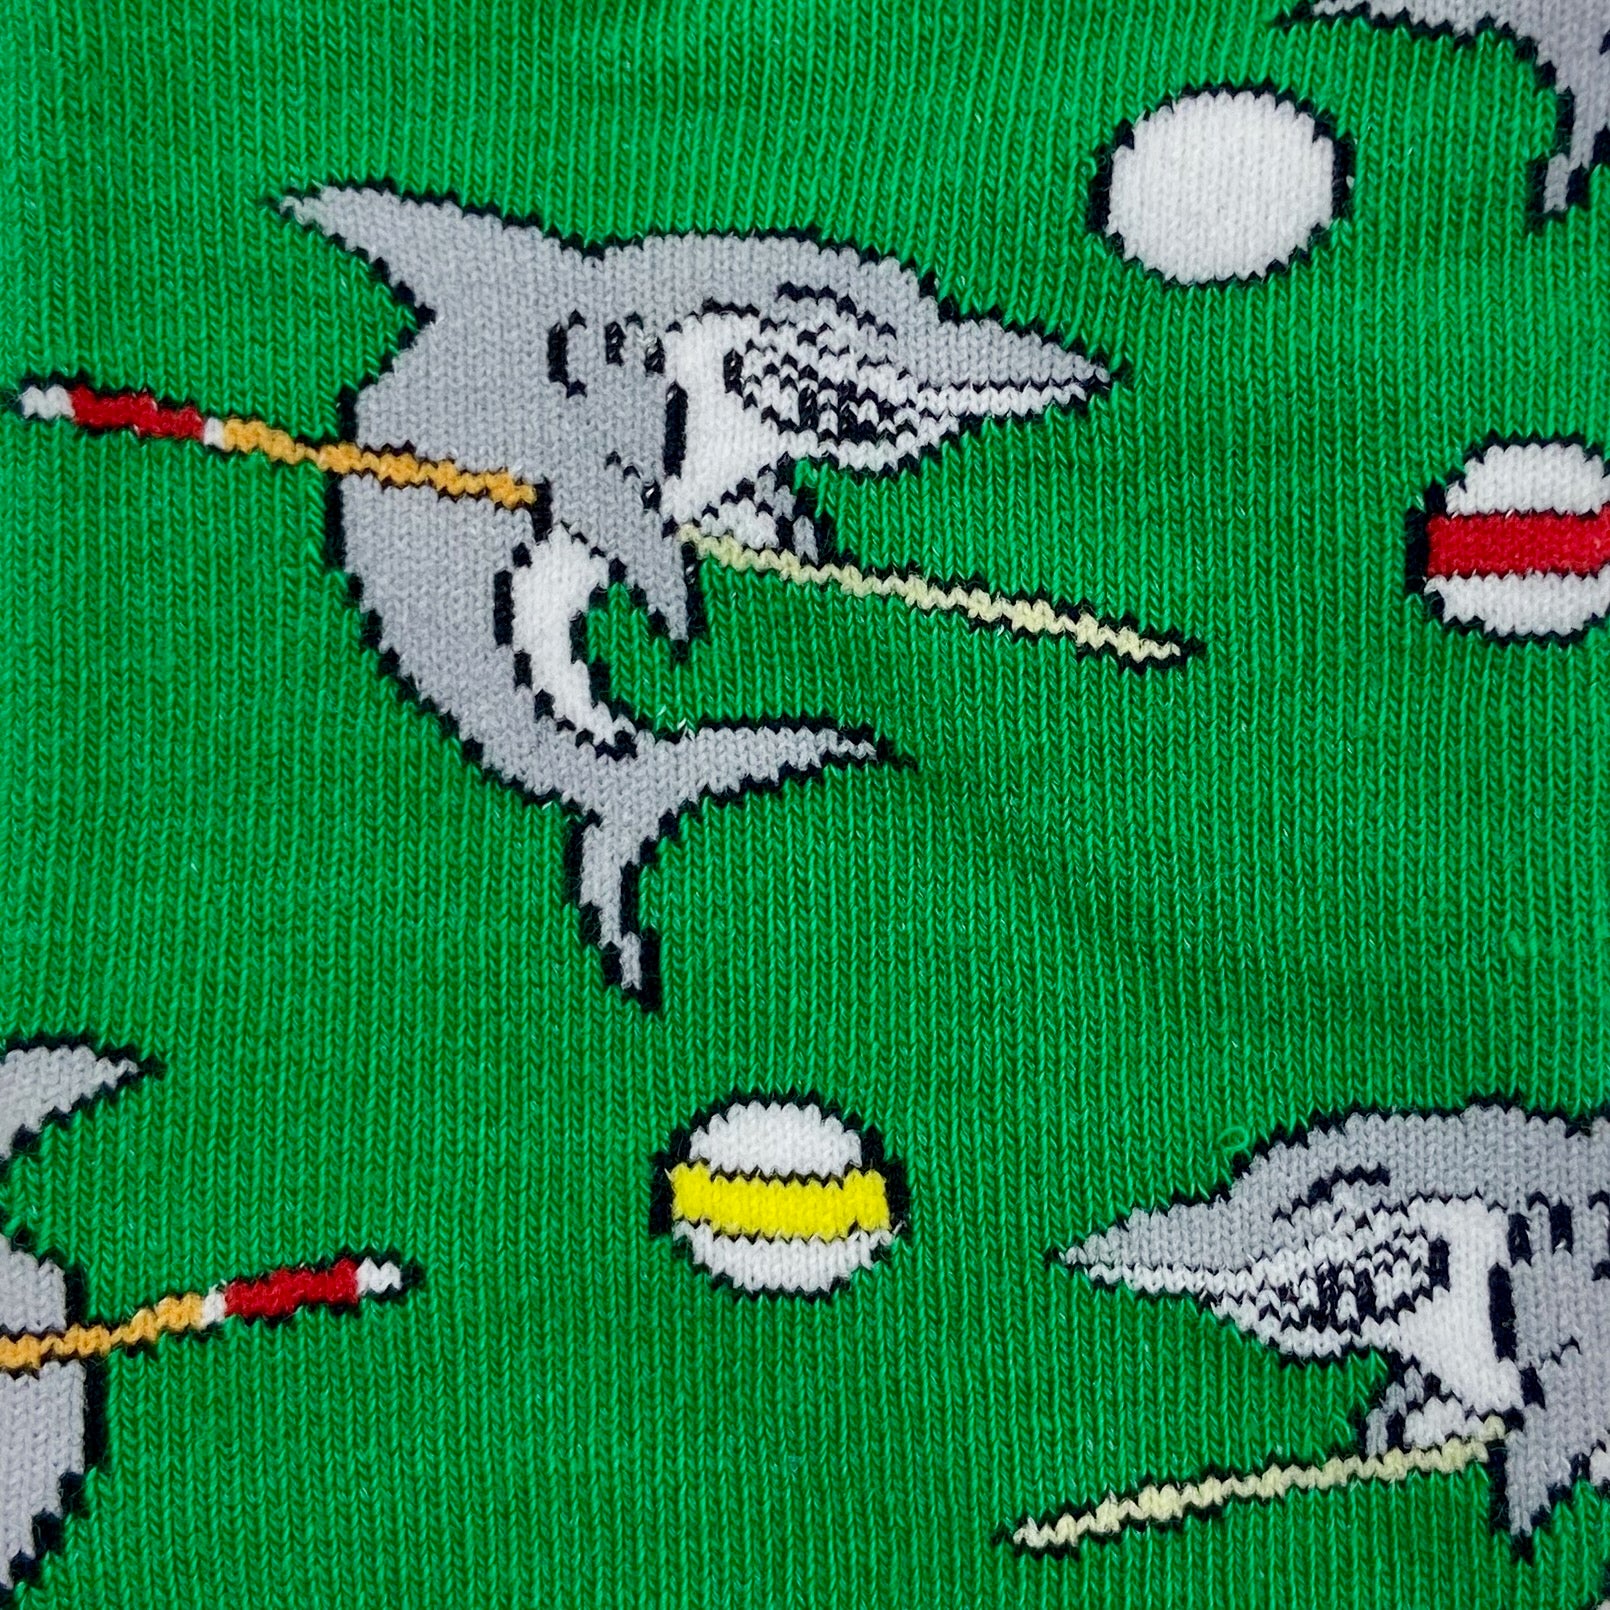 Sharks Playing Pool Billiards Snooker Patterned Novelty Socks in Green